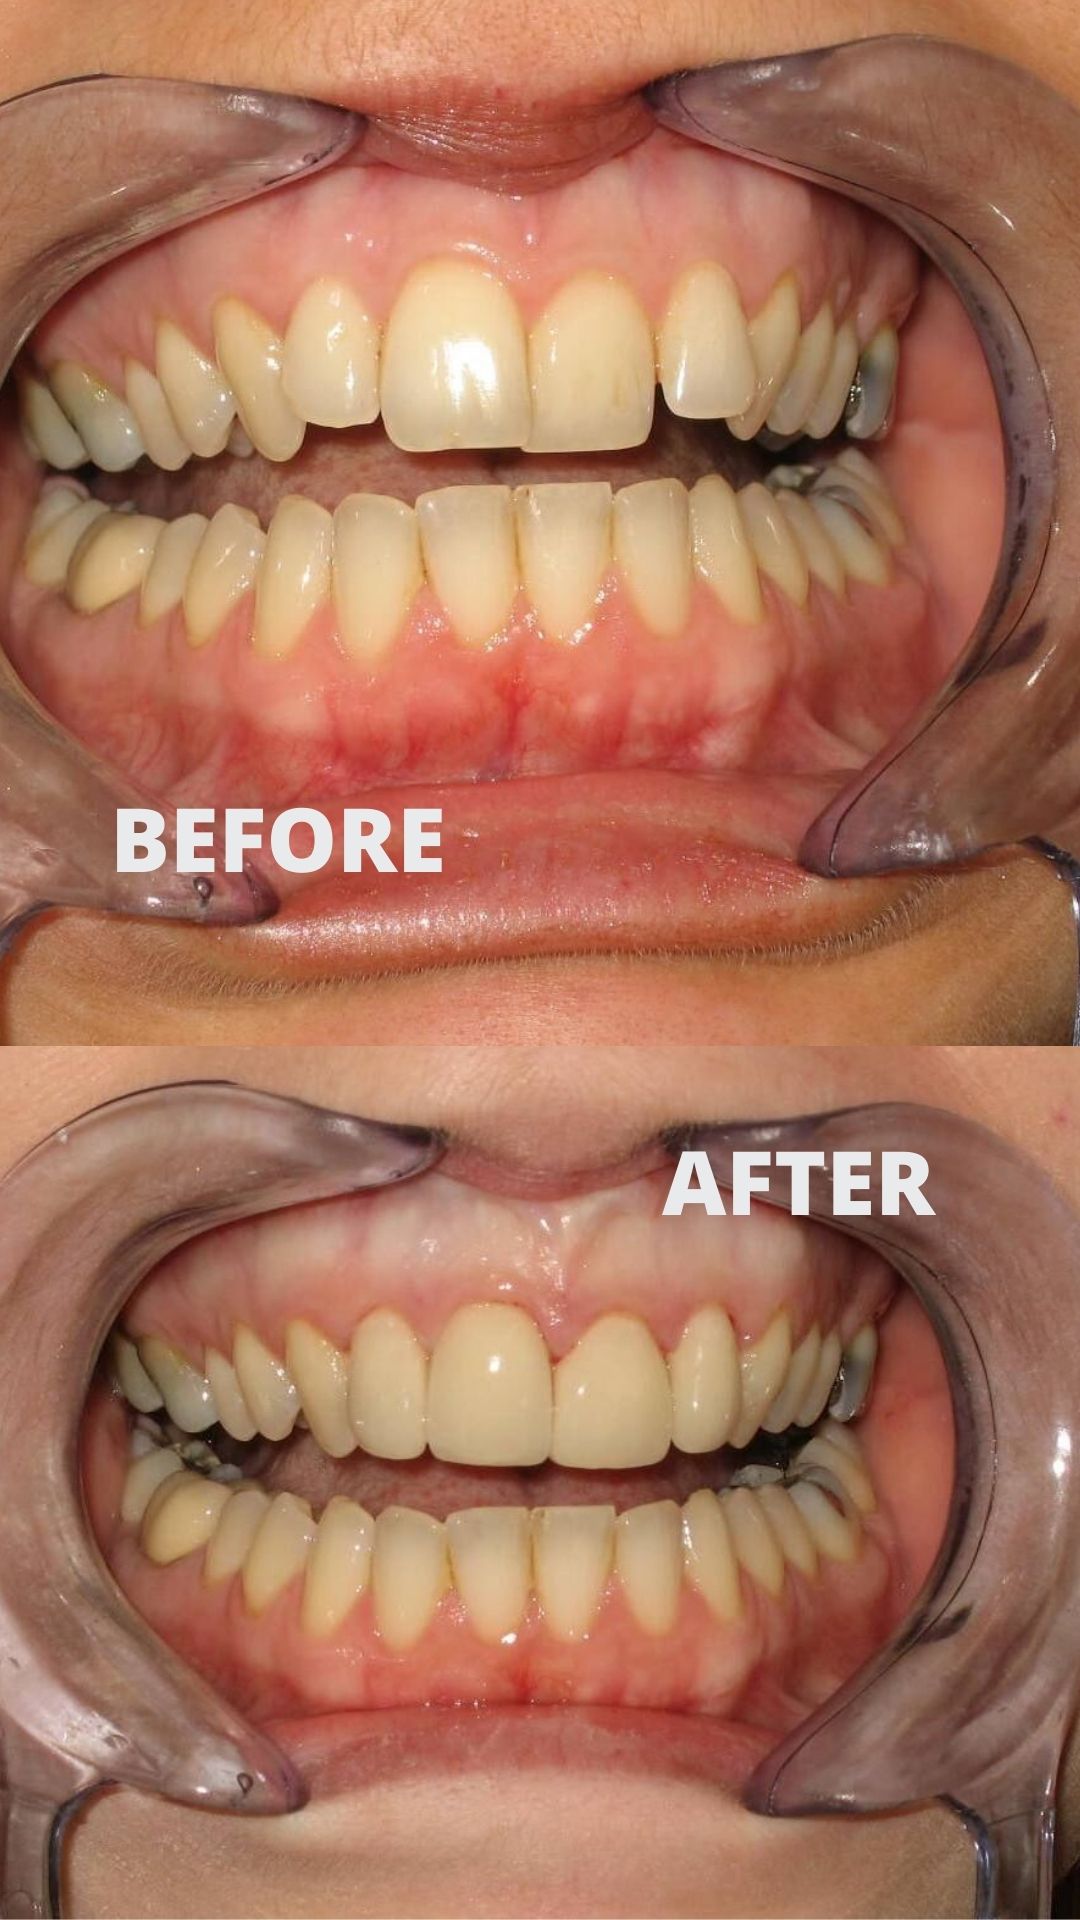 Before and after porcelain veneers